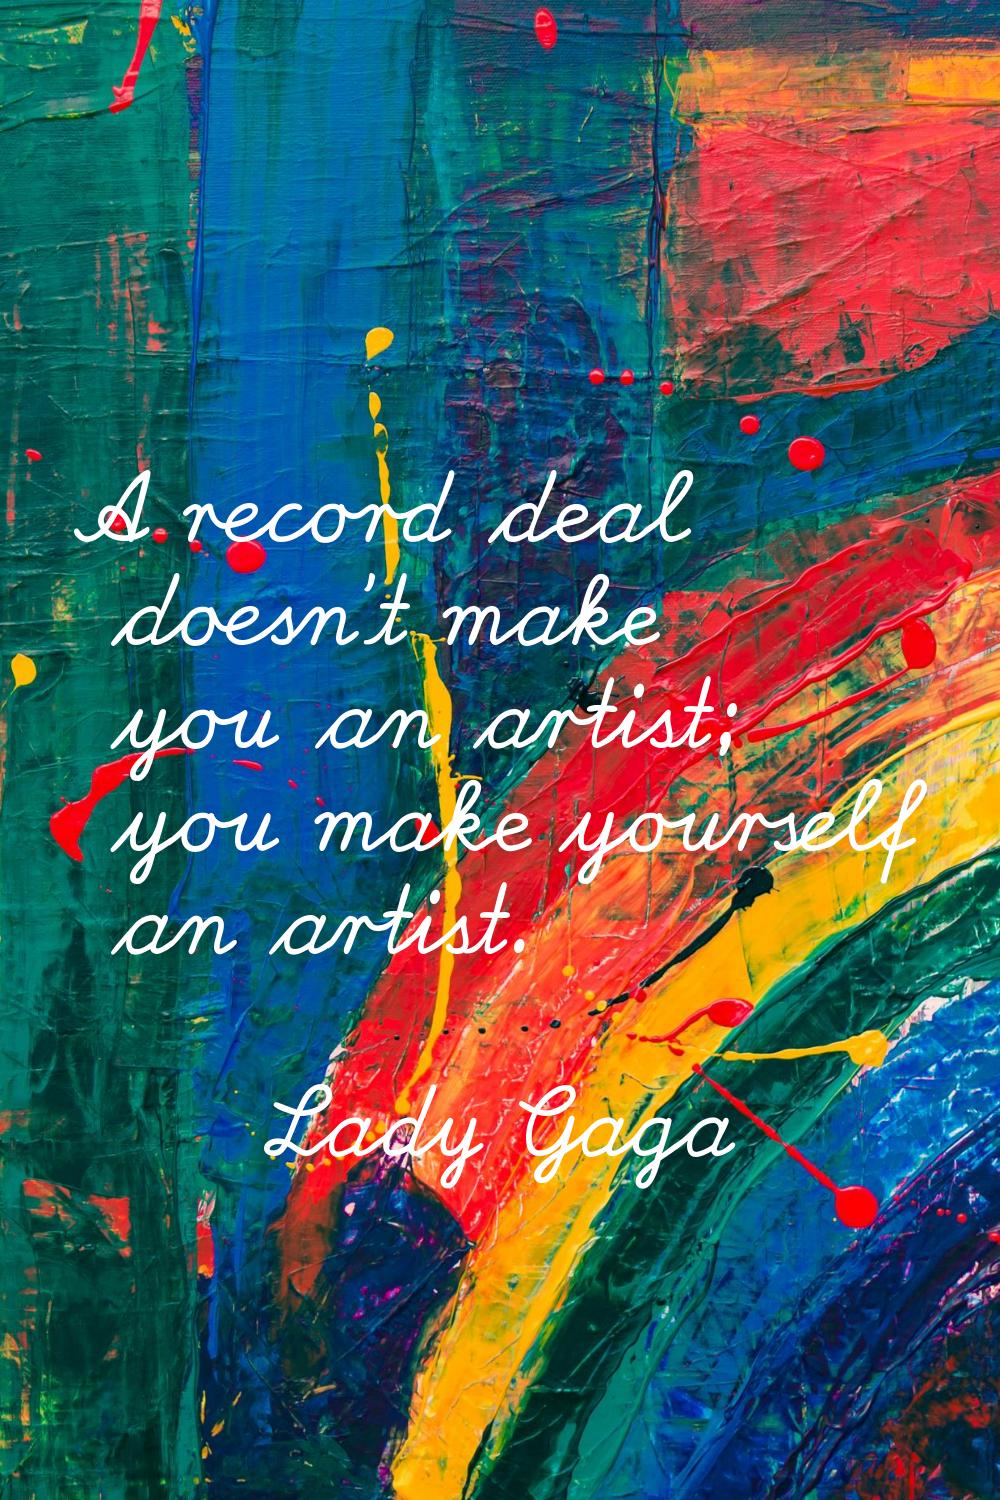 A record deal doesn't make you an artist; you make yourself an artist.